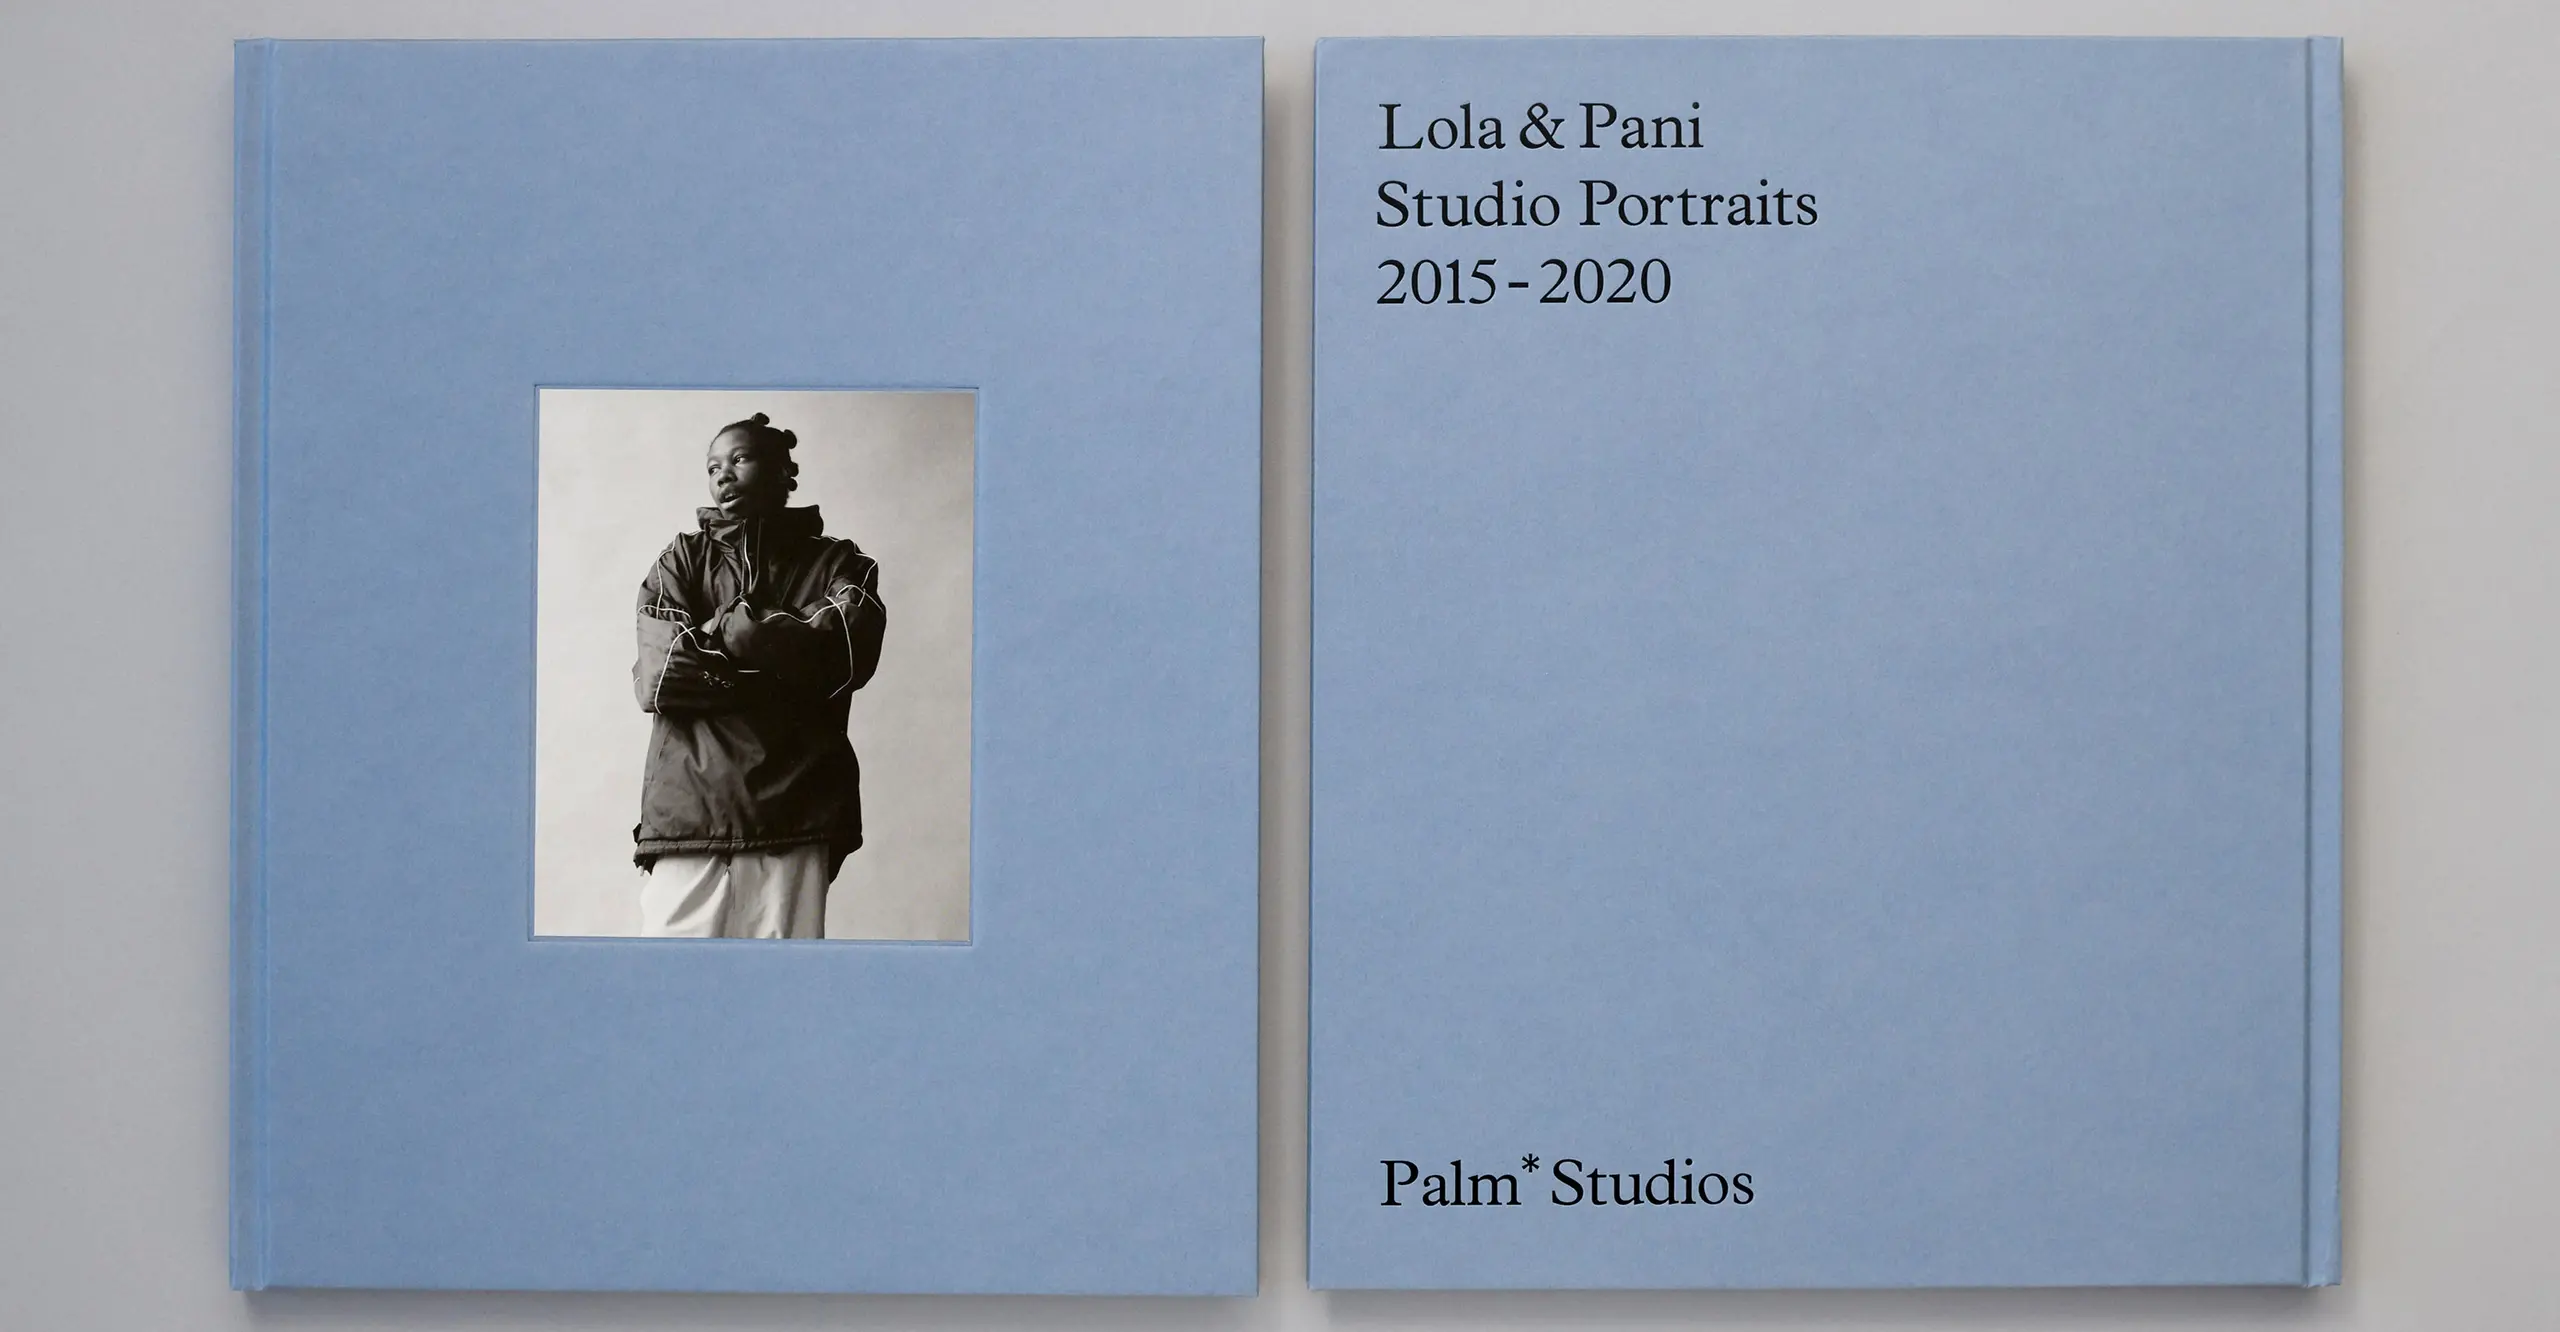 Back and front covers of a lilac coloured book with a black and white portrait of a figure on the front.